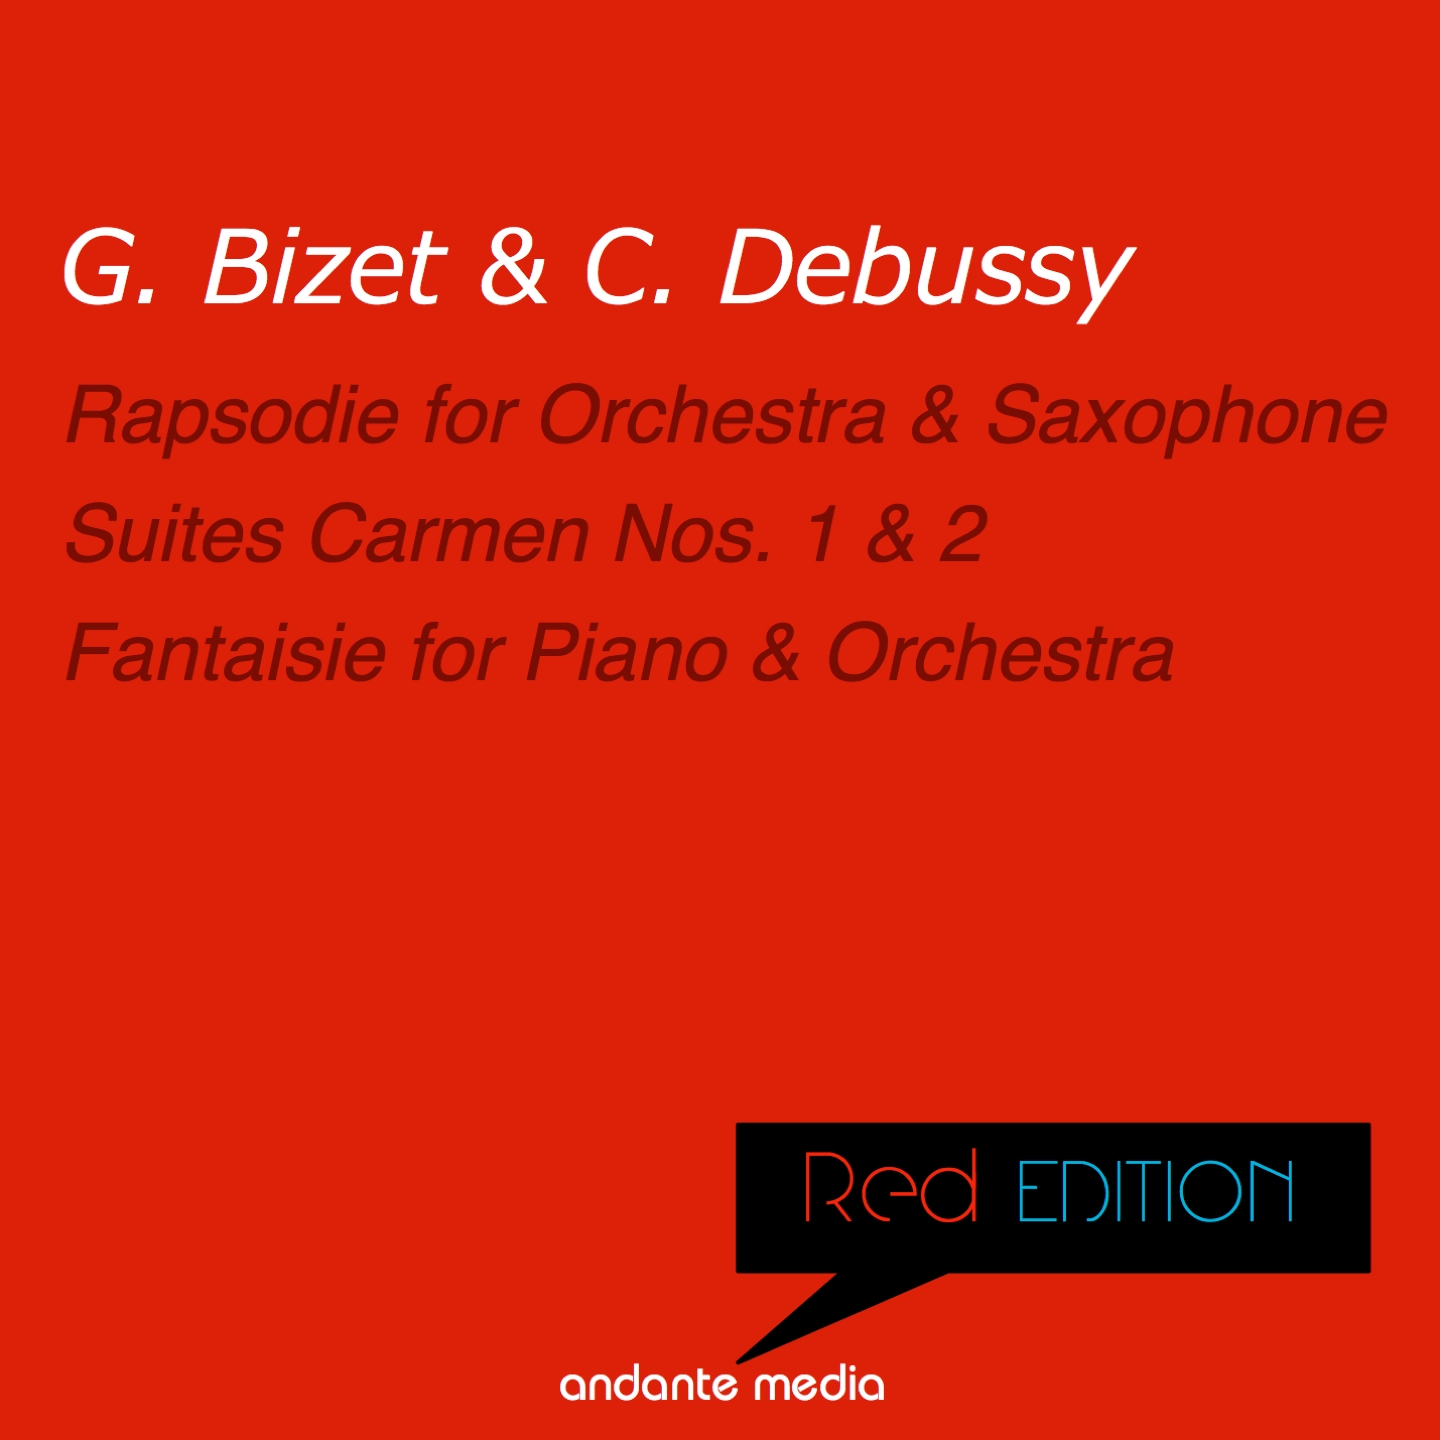 Red Edition - Debussy & Bizet: Rapsodie for Orchestra and Saxophone & Suites Carmen Nos. 1, 2